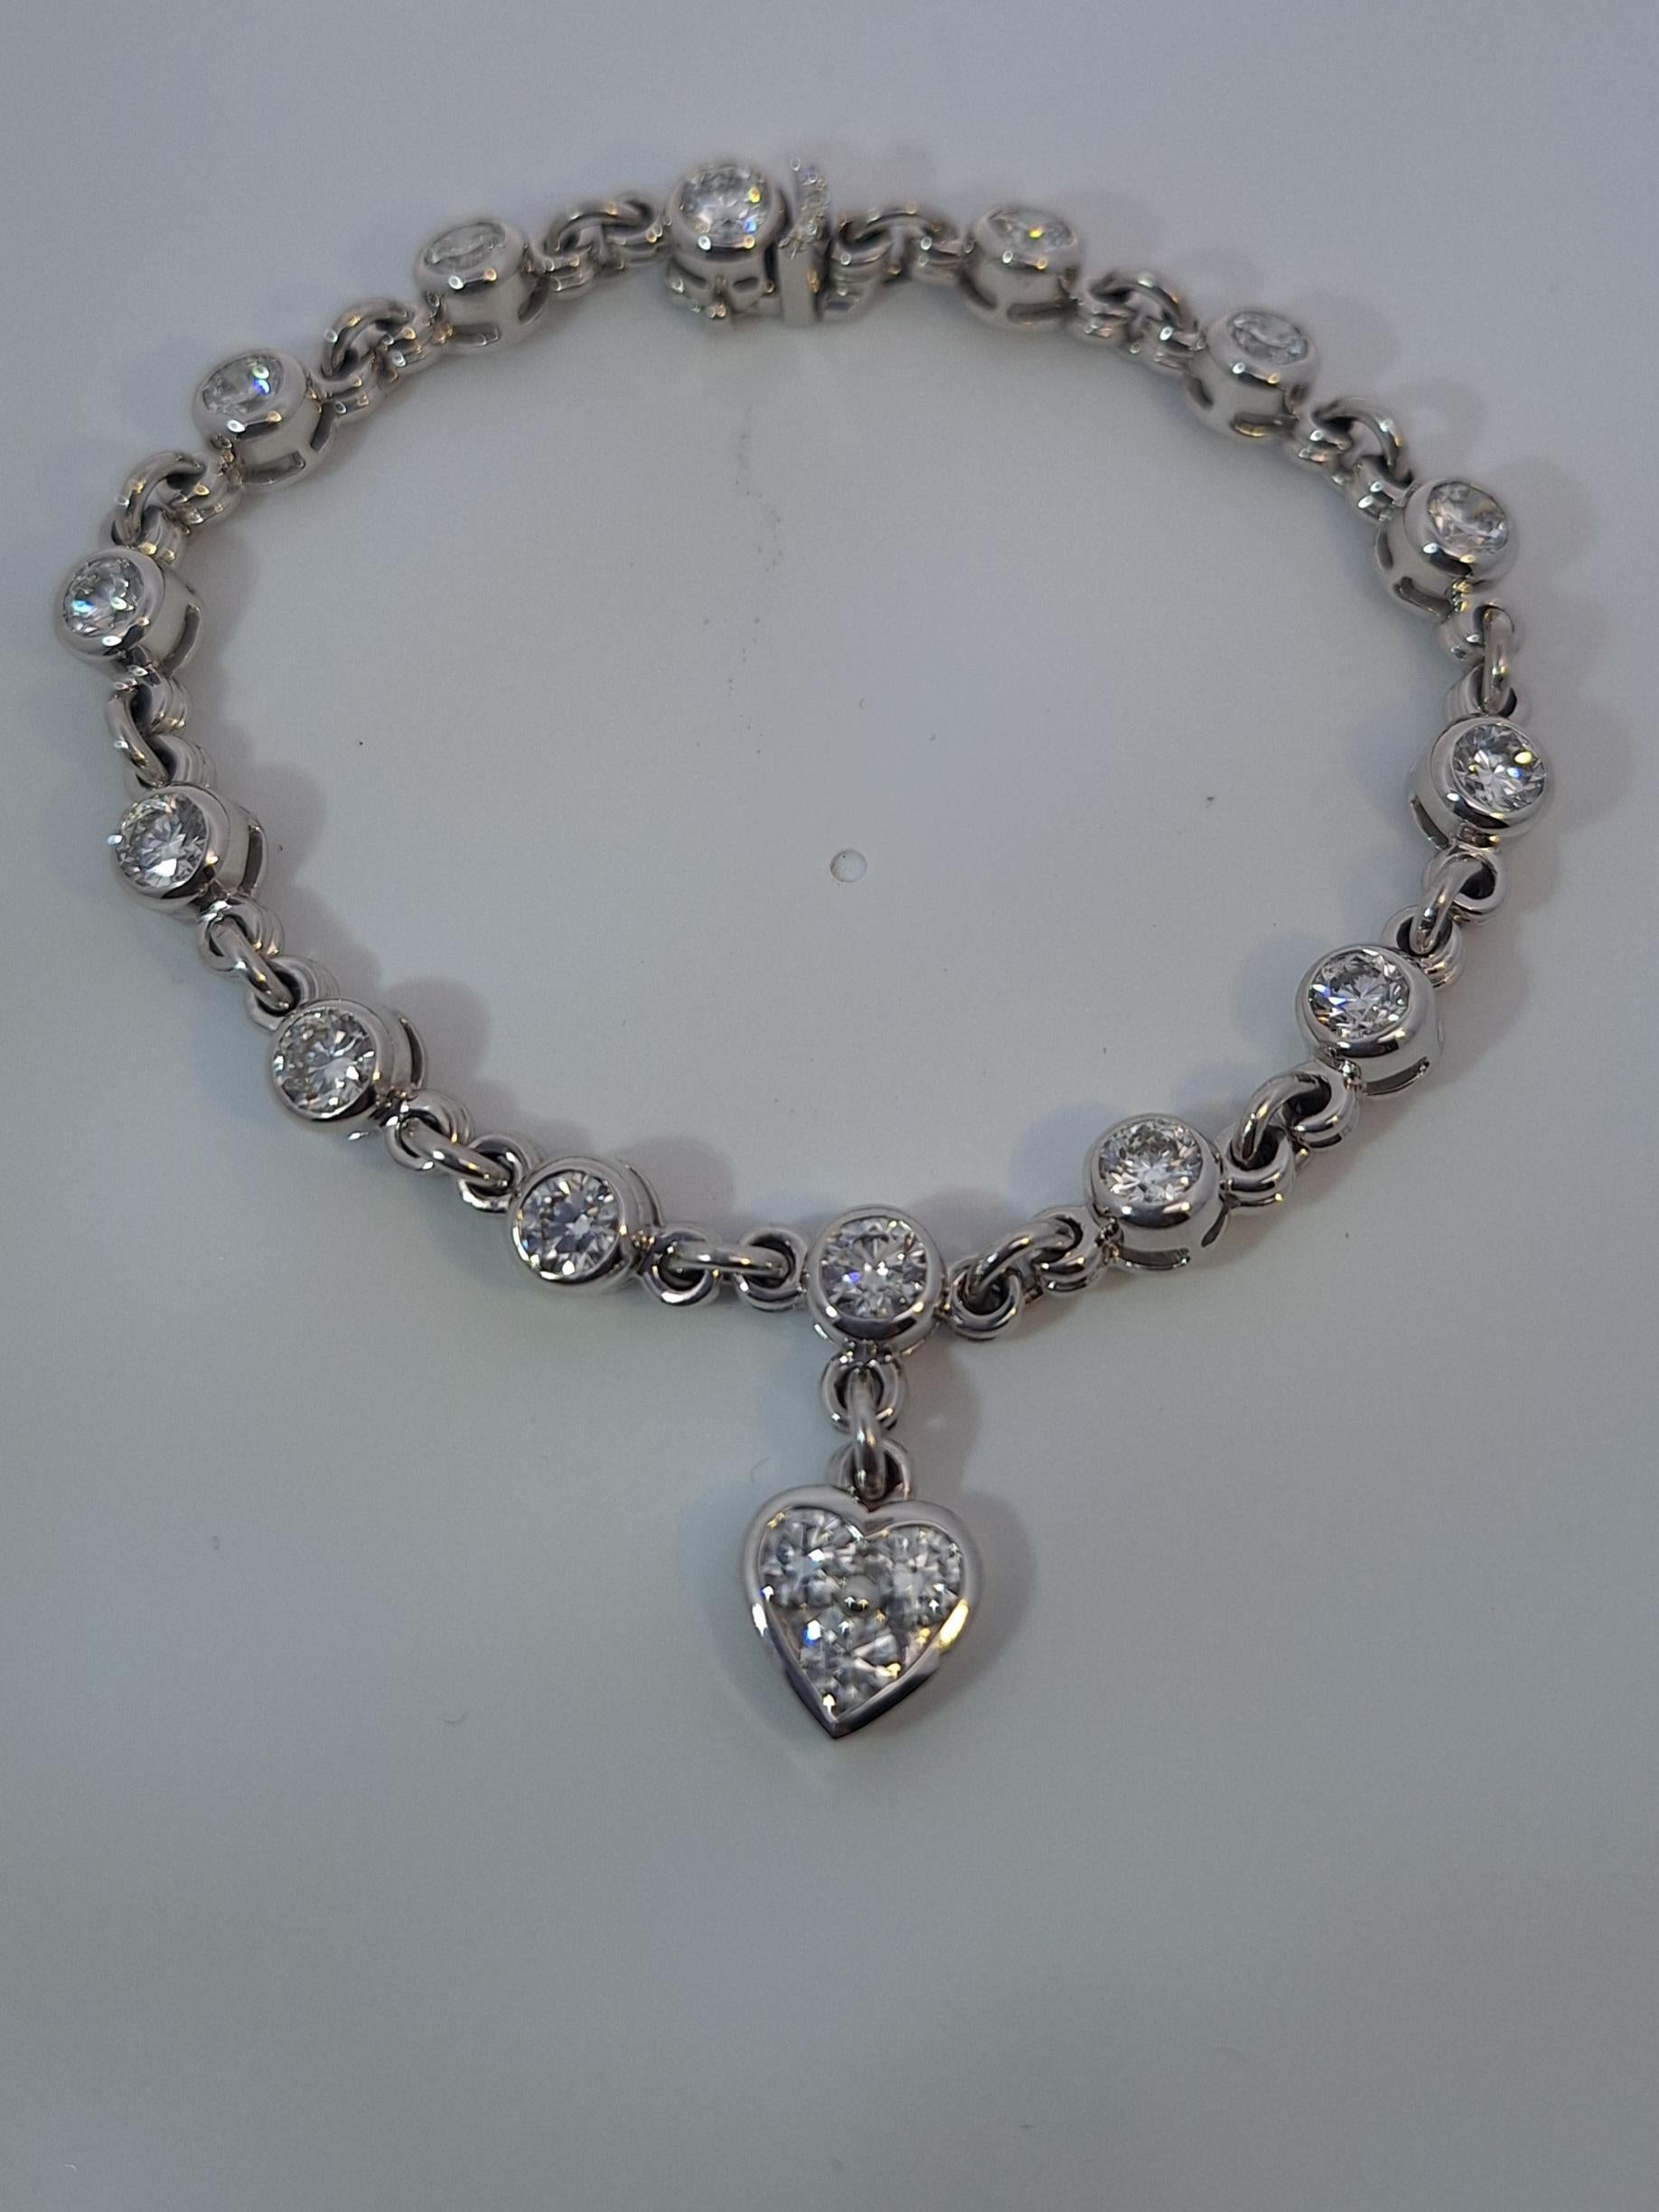 18Kt White Gold Diamond bracelet, features fourteen bezel set round brilliant cut diamonds and one hanging heart charm set with round diamonds. Total diamond weight is approximately 5.00 carats, E-F color and VS clarity. Length is approx. 6.5